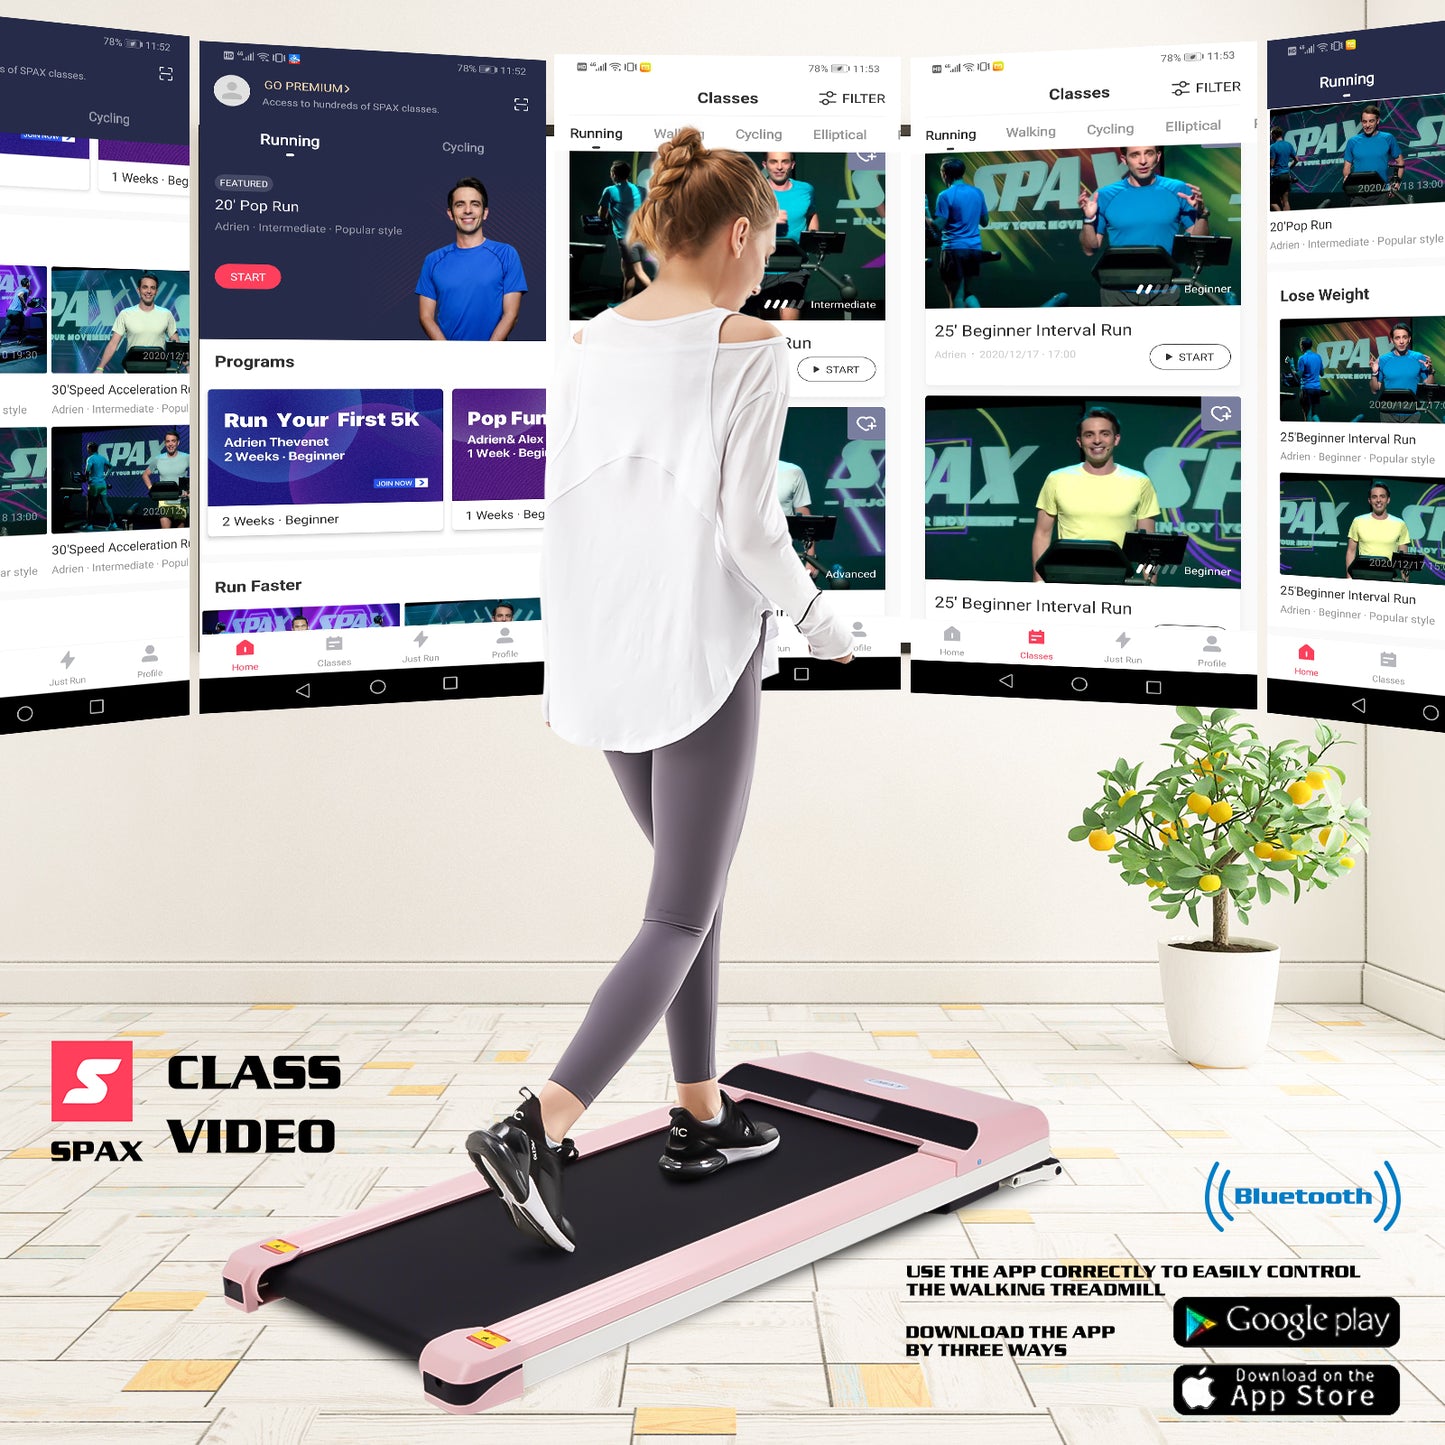 FitDesk(Note: Forbidden to sell on Amazon)